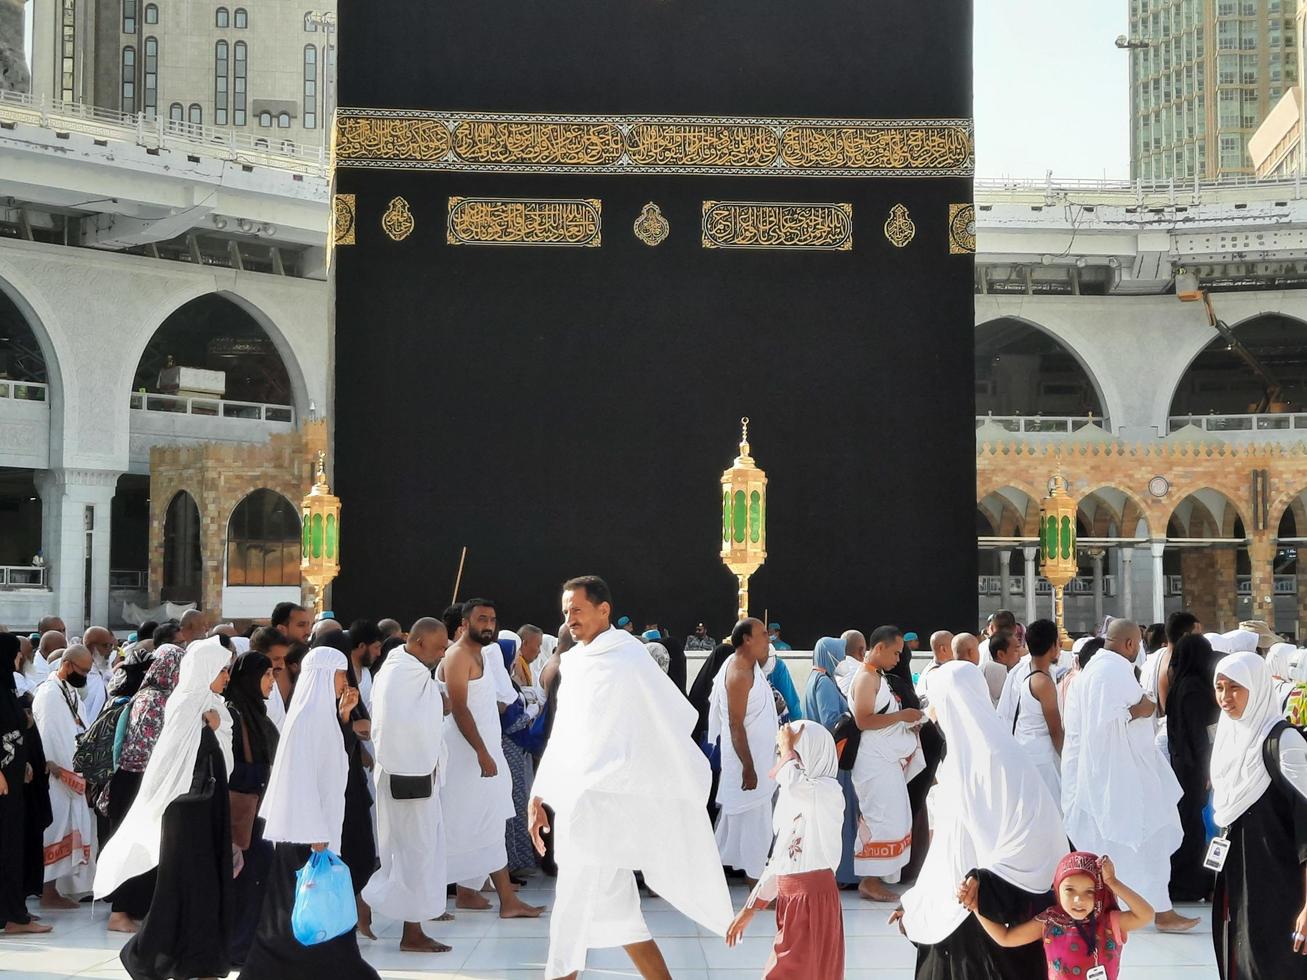 Mecca, Saudi Arabia, Sep 2022 - Pilgrims from all over the world are performing Tawaf in Masjid Al Haram in Mecca. photo